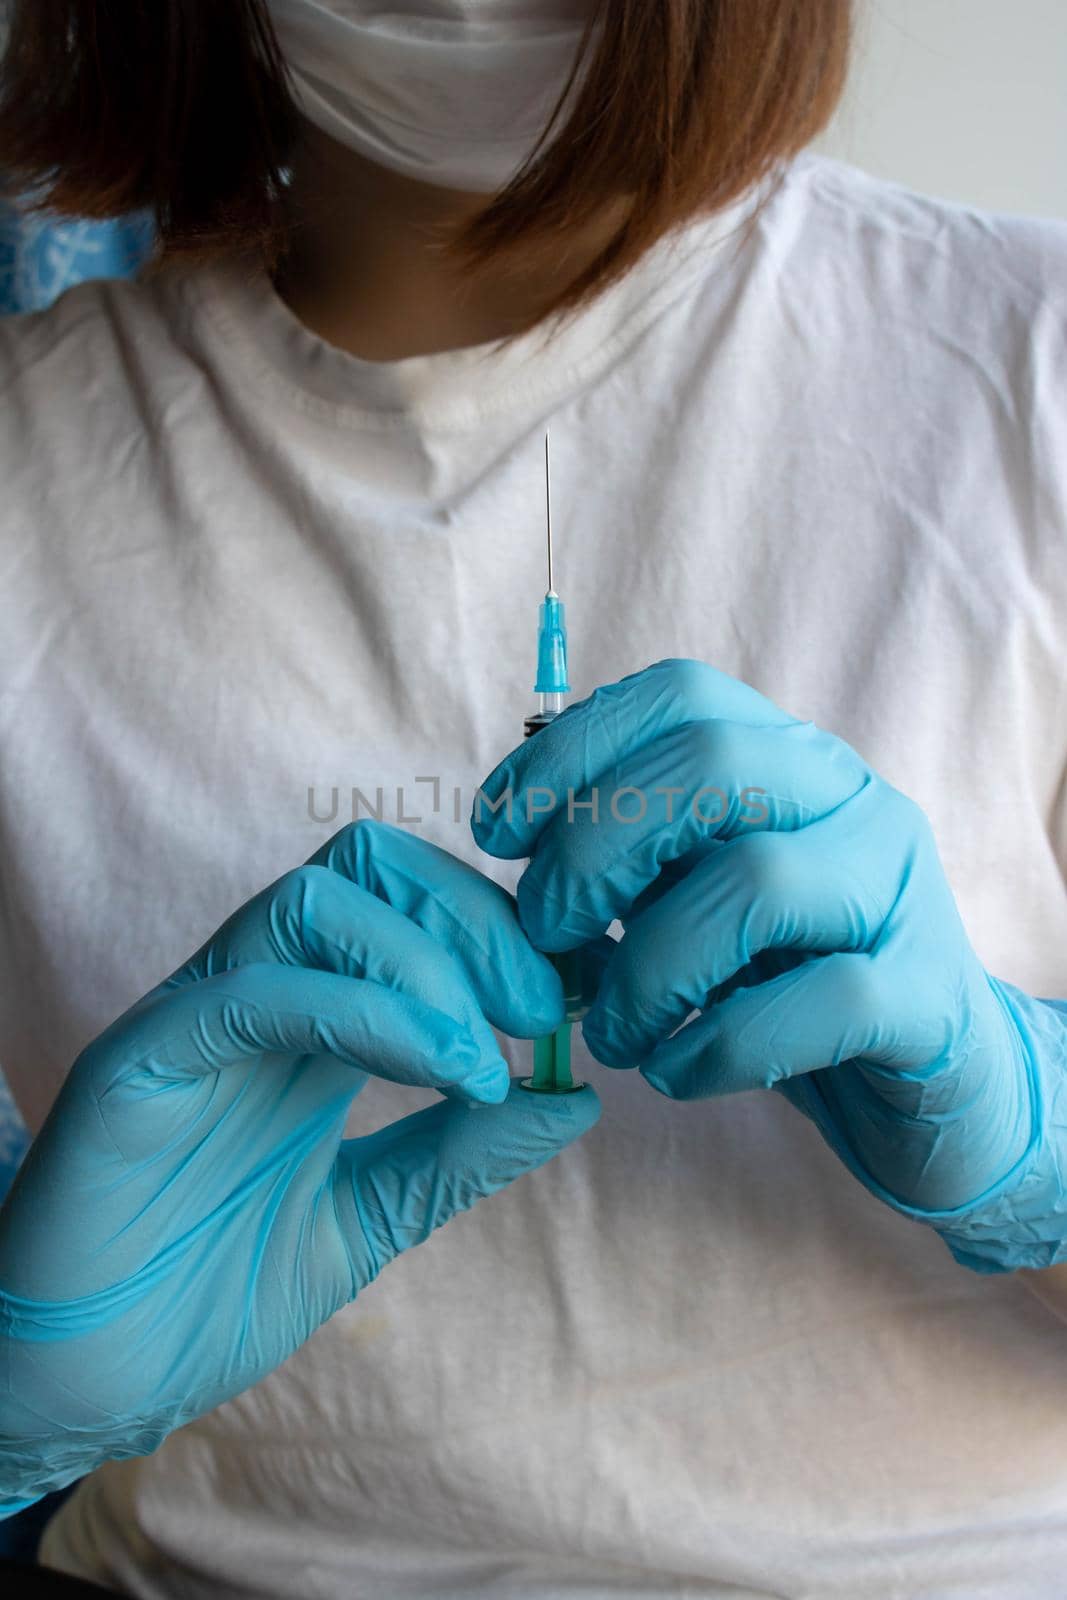 A syringe with a needle in the hand of a girl in a surgical mask and medical gloves by lapushka62